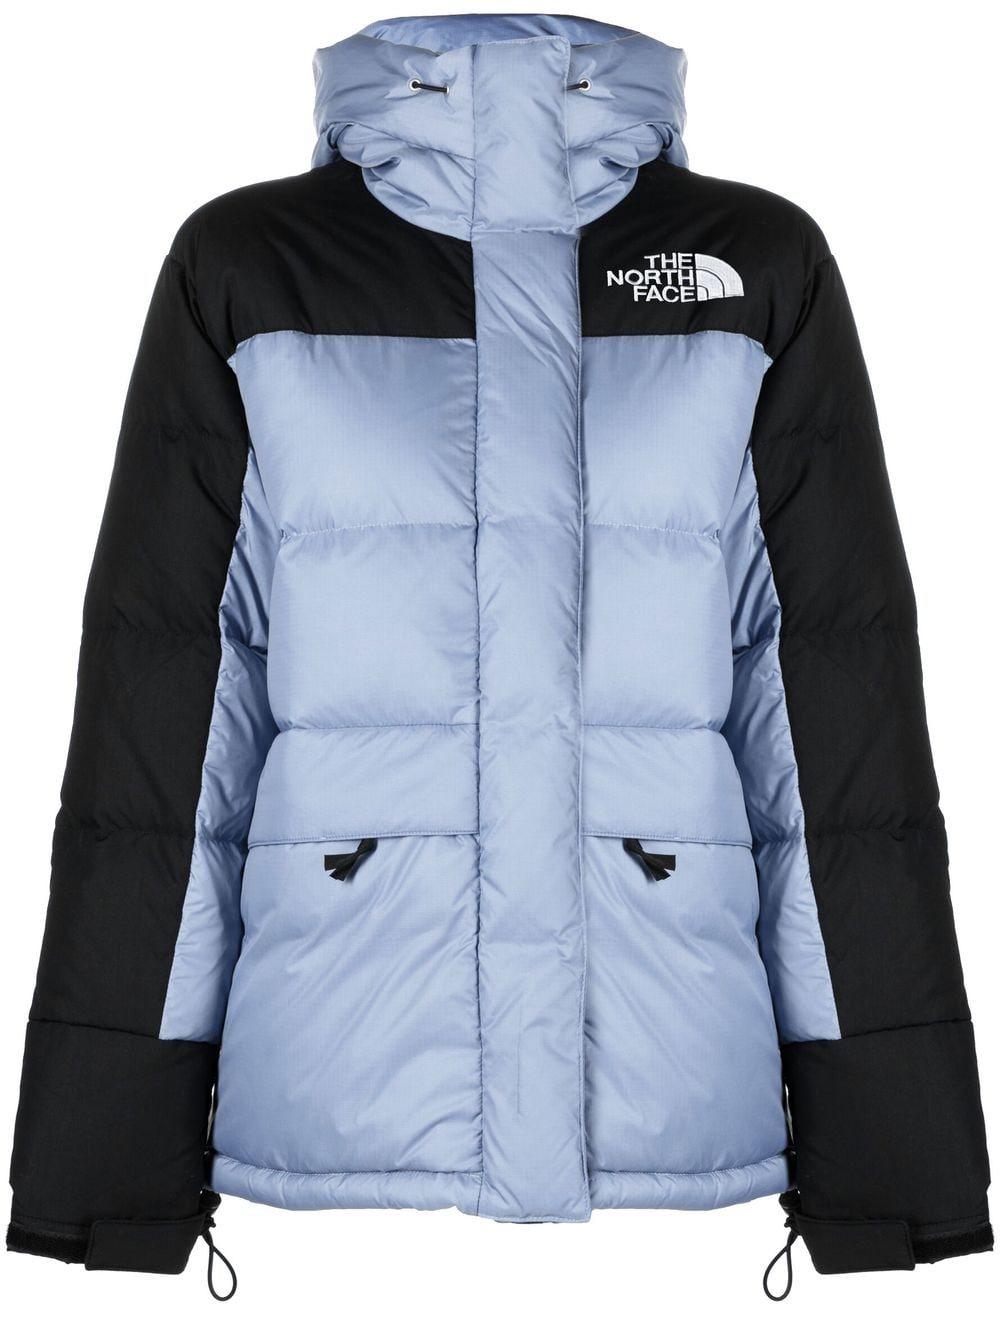 The North Face Himalayan Insulated Parka Coat in Black | Lyst